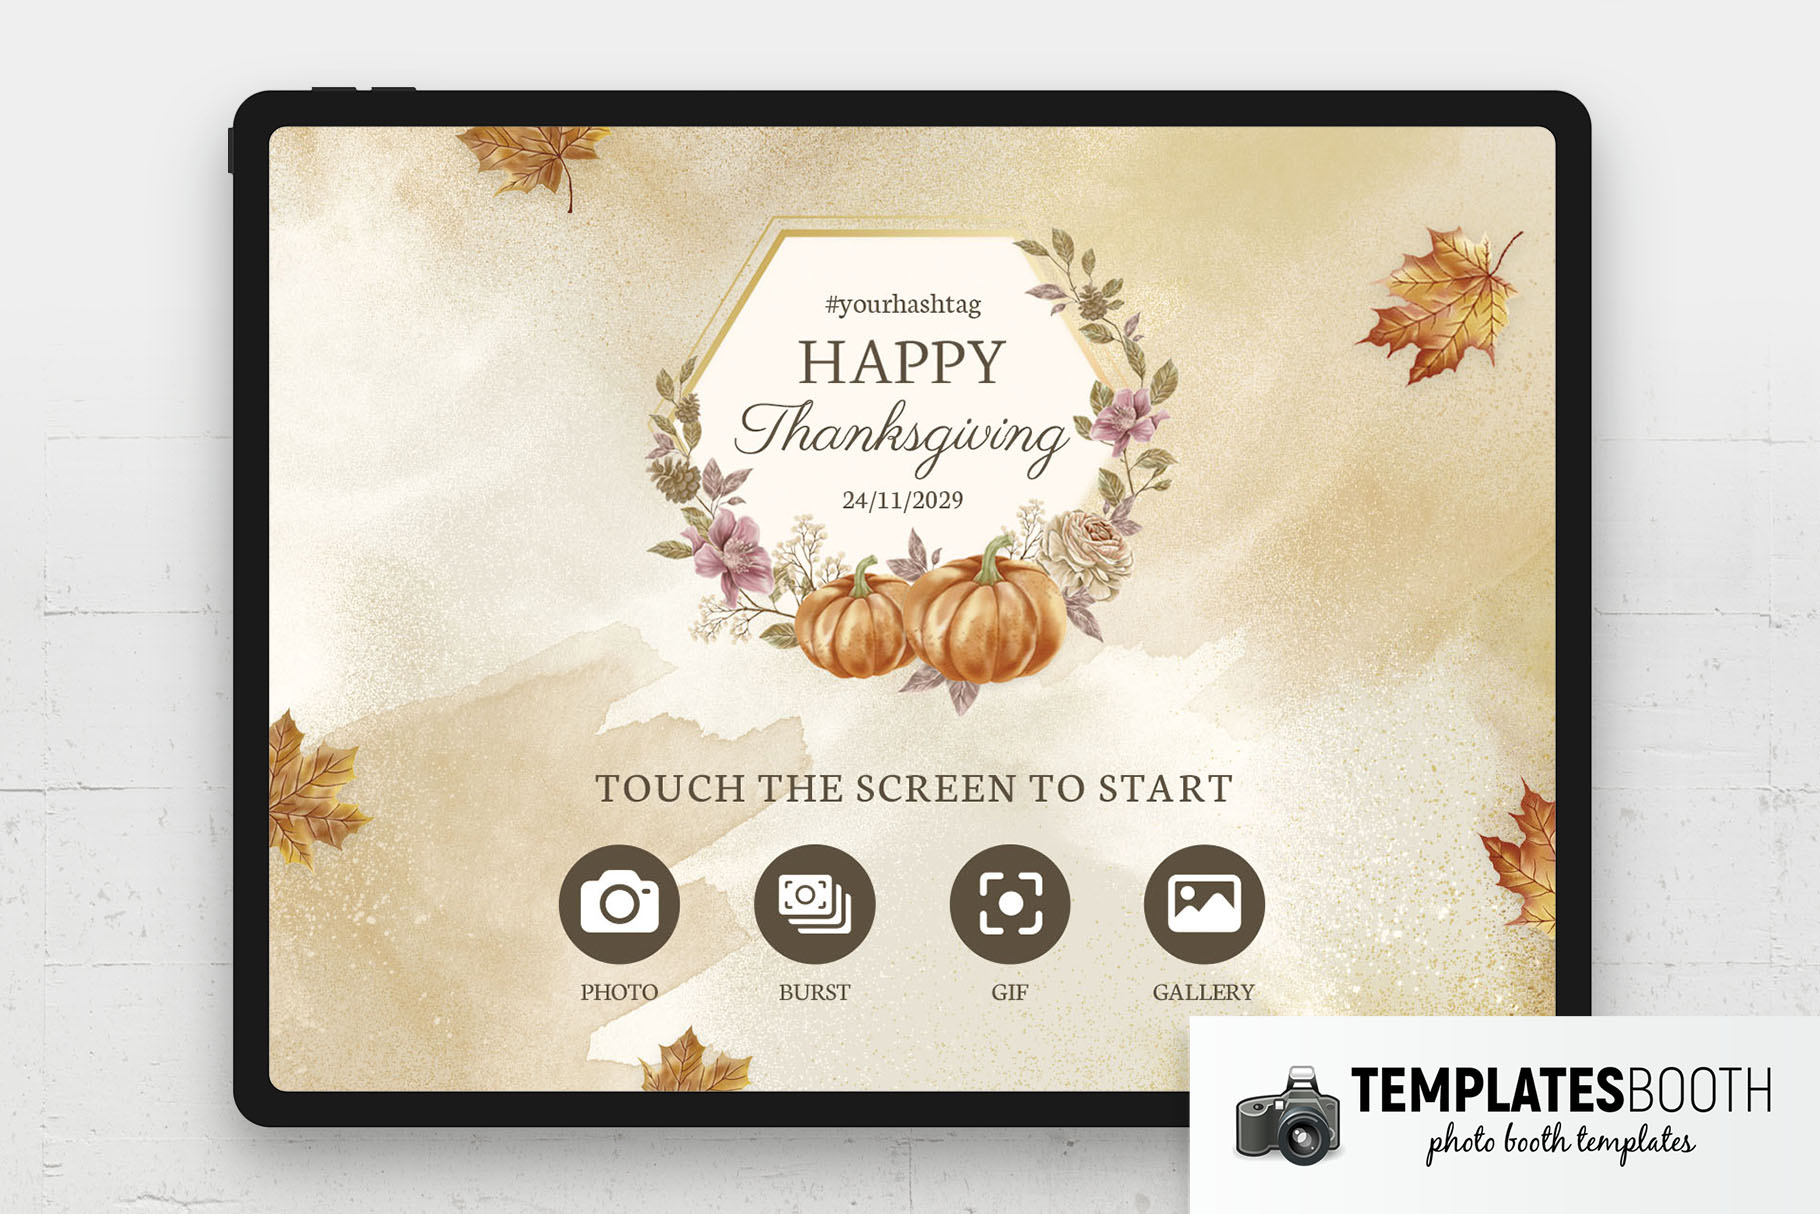 Rustic Thanksgiving Photo Booth Welcome Screen